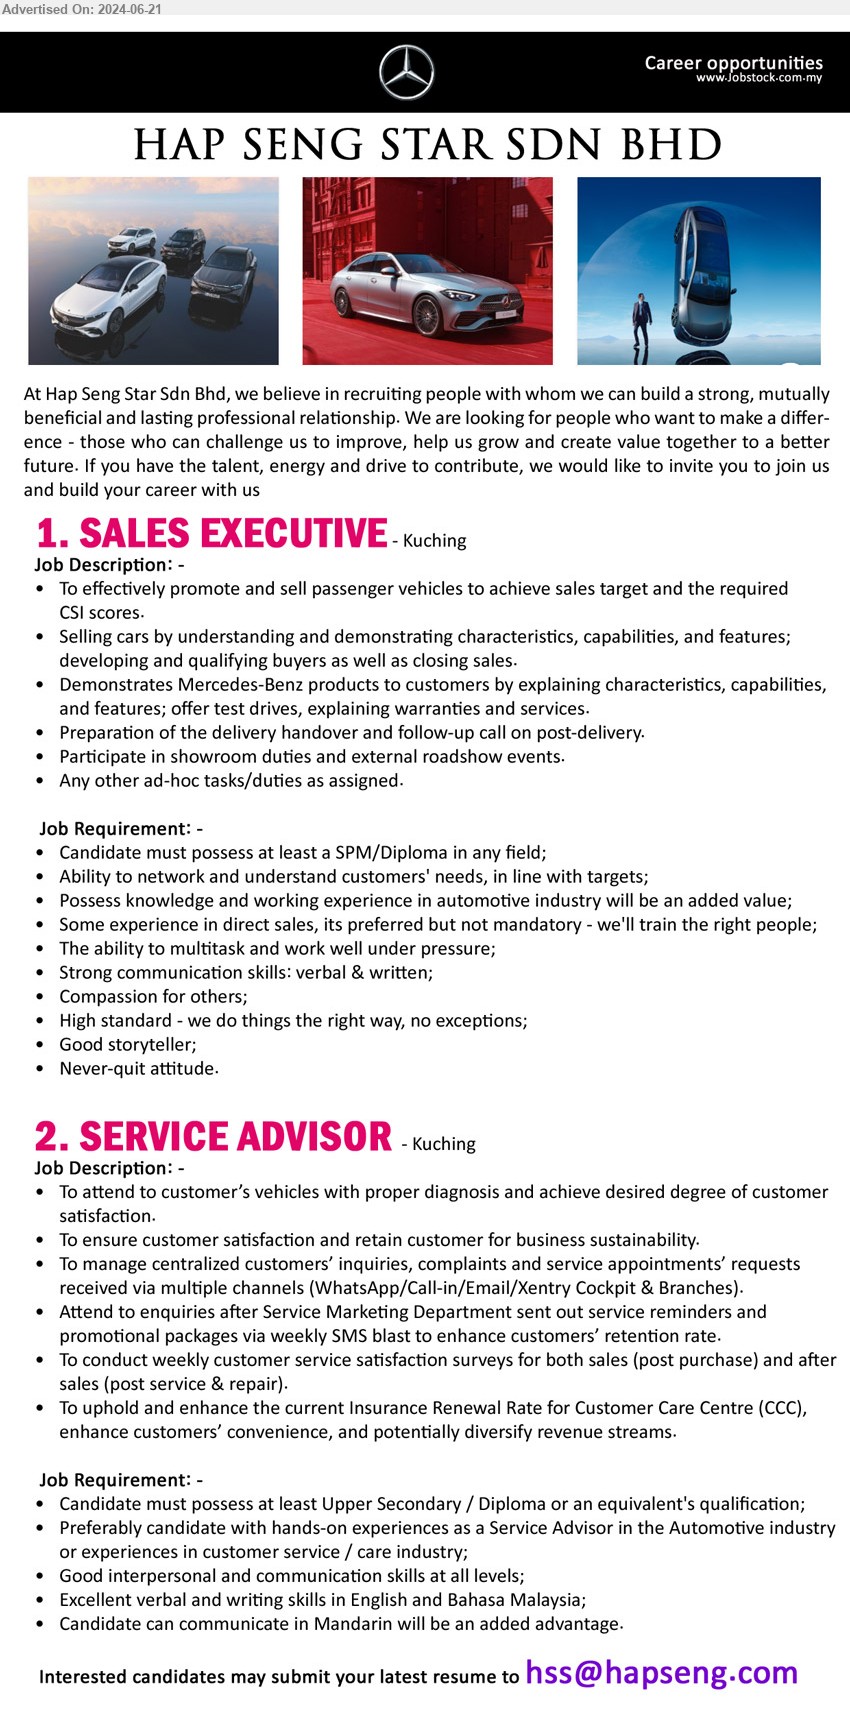 HAP SENG STAR SDN BHD - 1. SALES EXECUTIVE (Kuching), SPM/Diploma in any field; Ability to network and understand customers' needs, in line with targets;,...
2. SERVICE ADVISOR (Kuching), Upper Secondary / Diploma, Excellent verbal and writing skills in English and Bahasa Malaysia, exp in automotive industry, ...
Email resume to ...